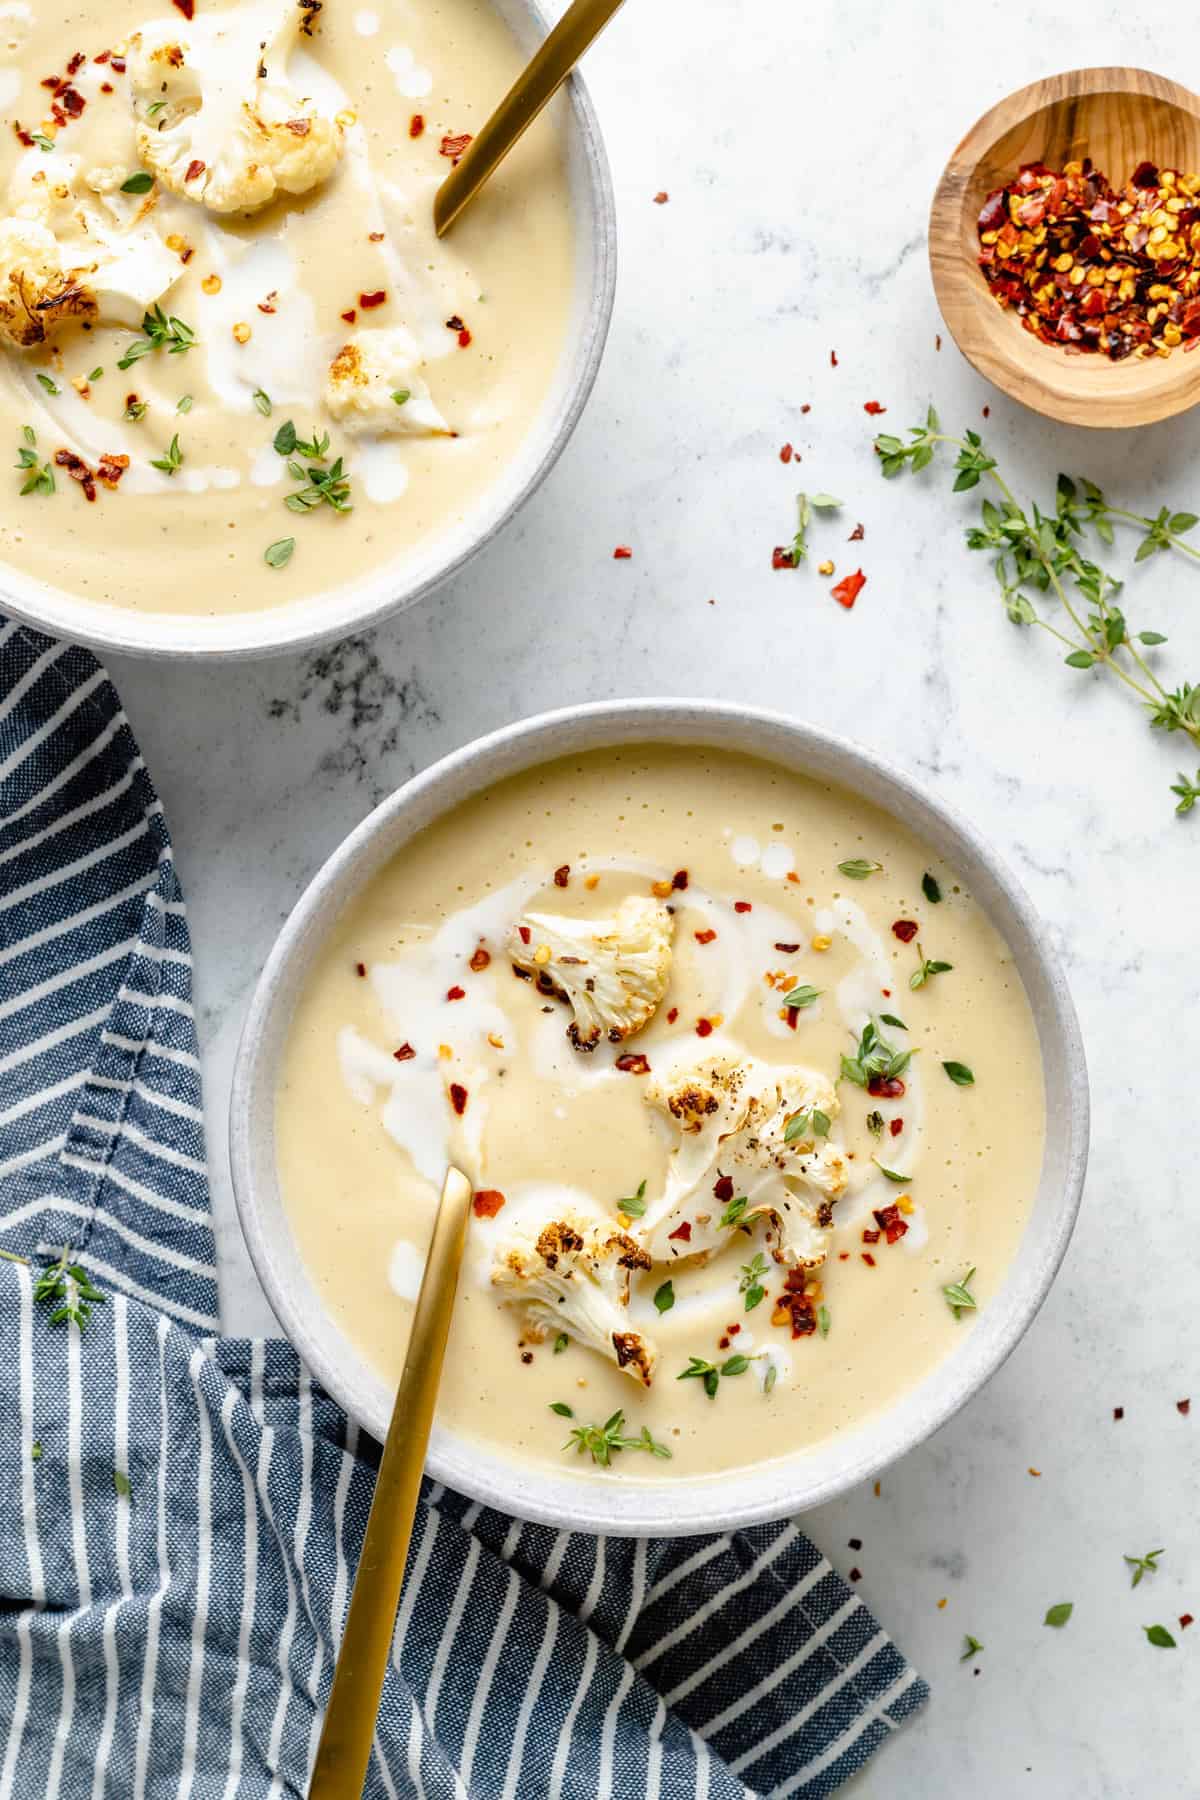 Overhead view of two bowls filled with cauliflower soup, garnished with red pepper flakes, thyme, and coconut milk